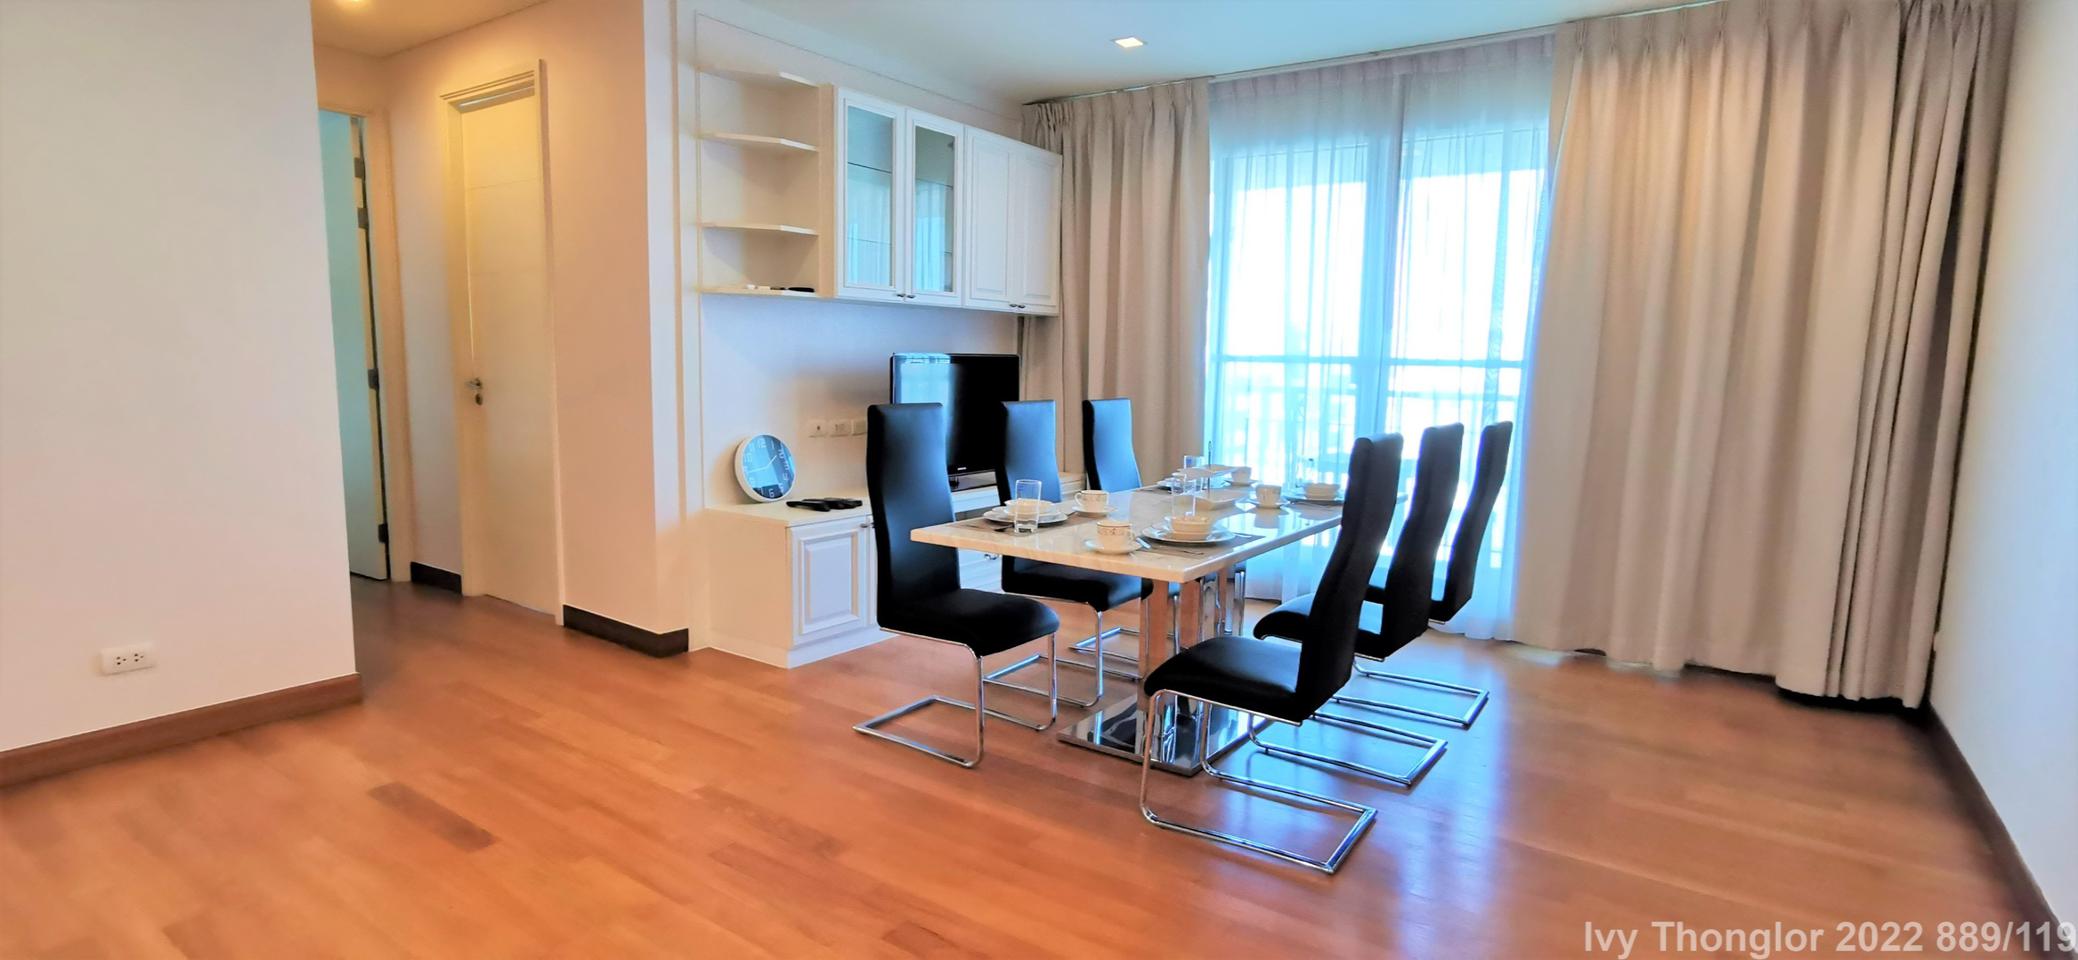 Ivy thonglor is a LUXURY condo in the heart of thonglor Fully Furnished 4 beds  4 baths all your floor 10th รูปเล็กที่ 5